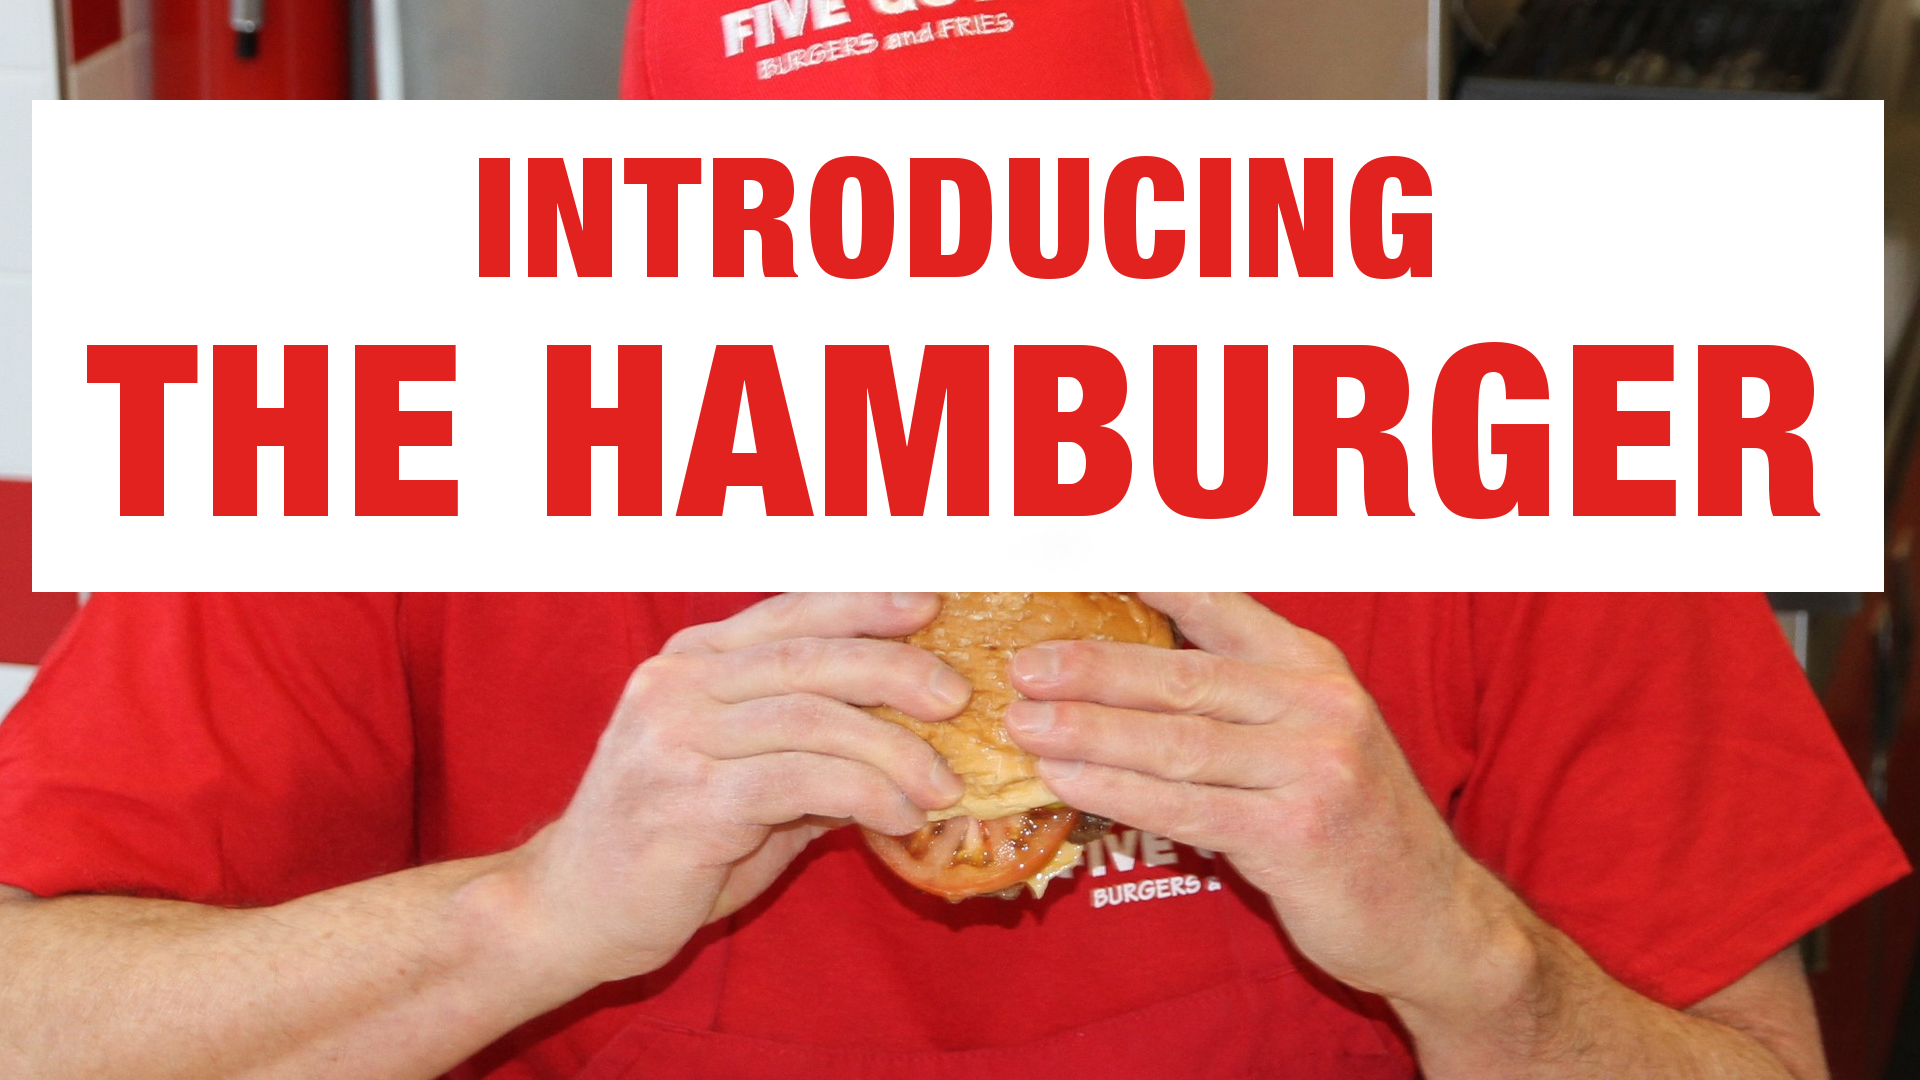 Luxembourg Five Guys